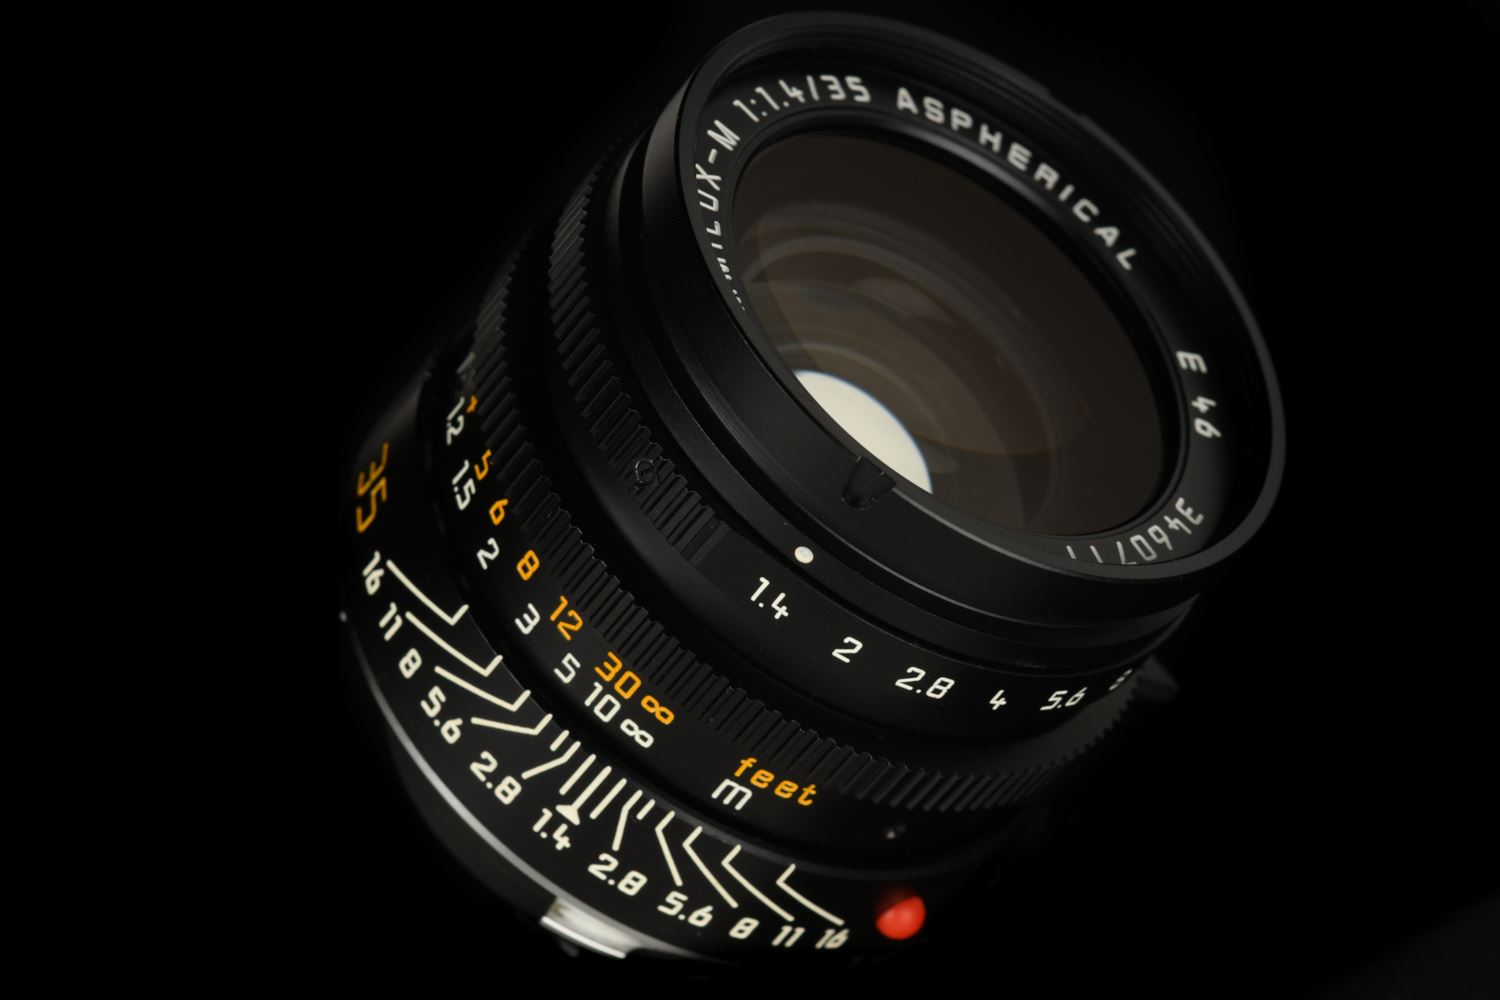 Picture of Leica Summilux-M 35mm f/1.4 ASPHERICAL Double ASPH AA